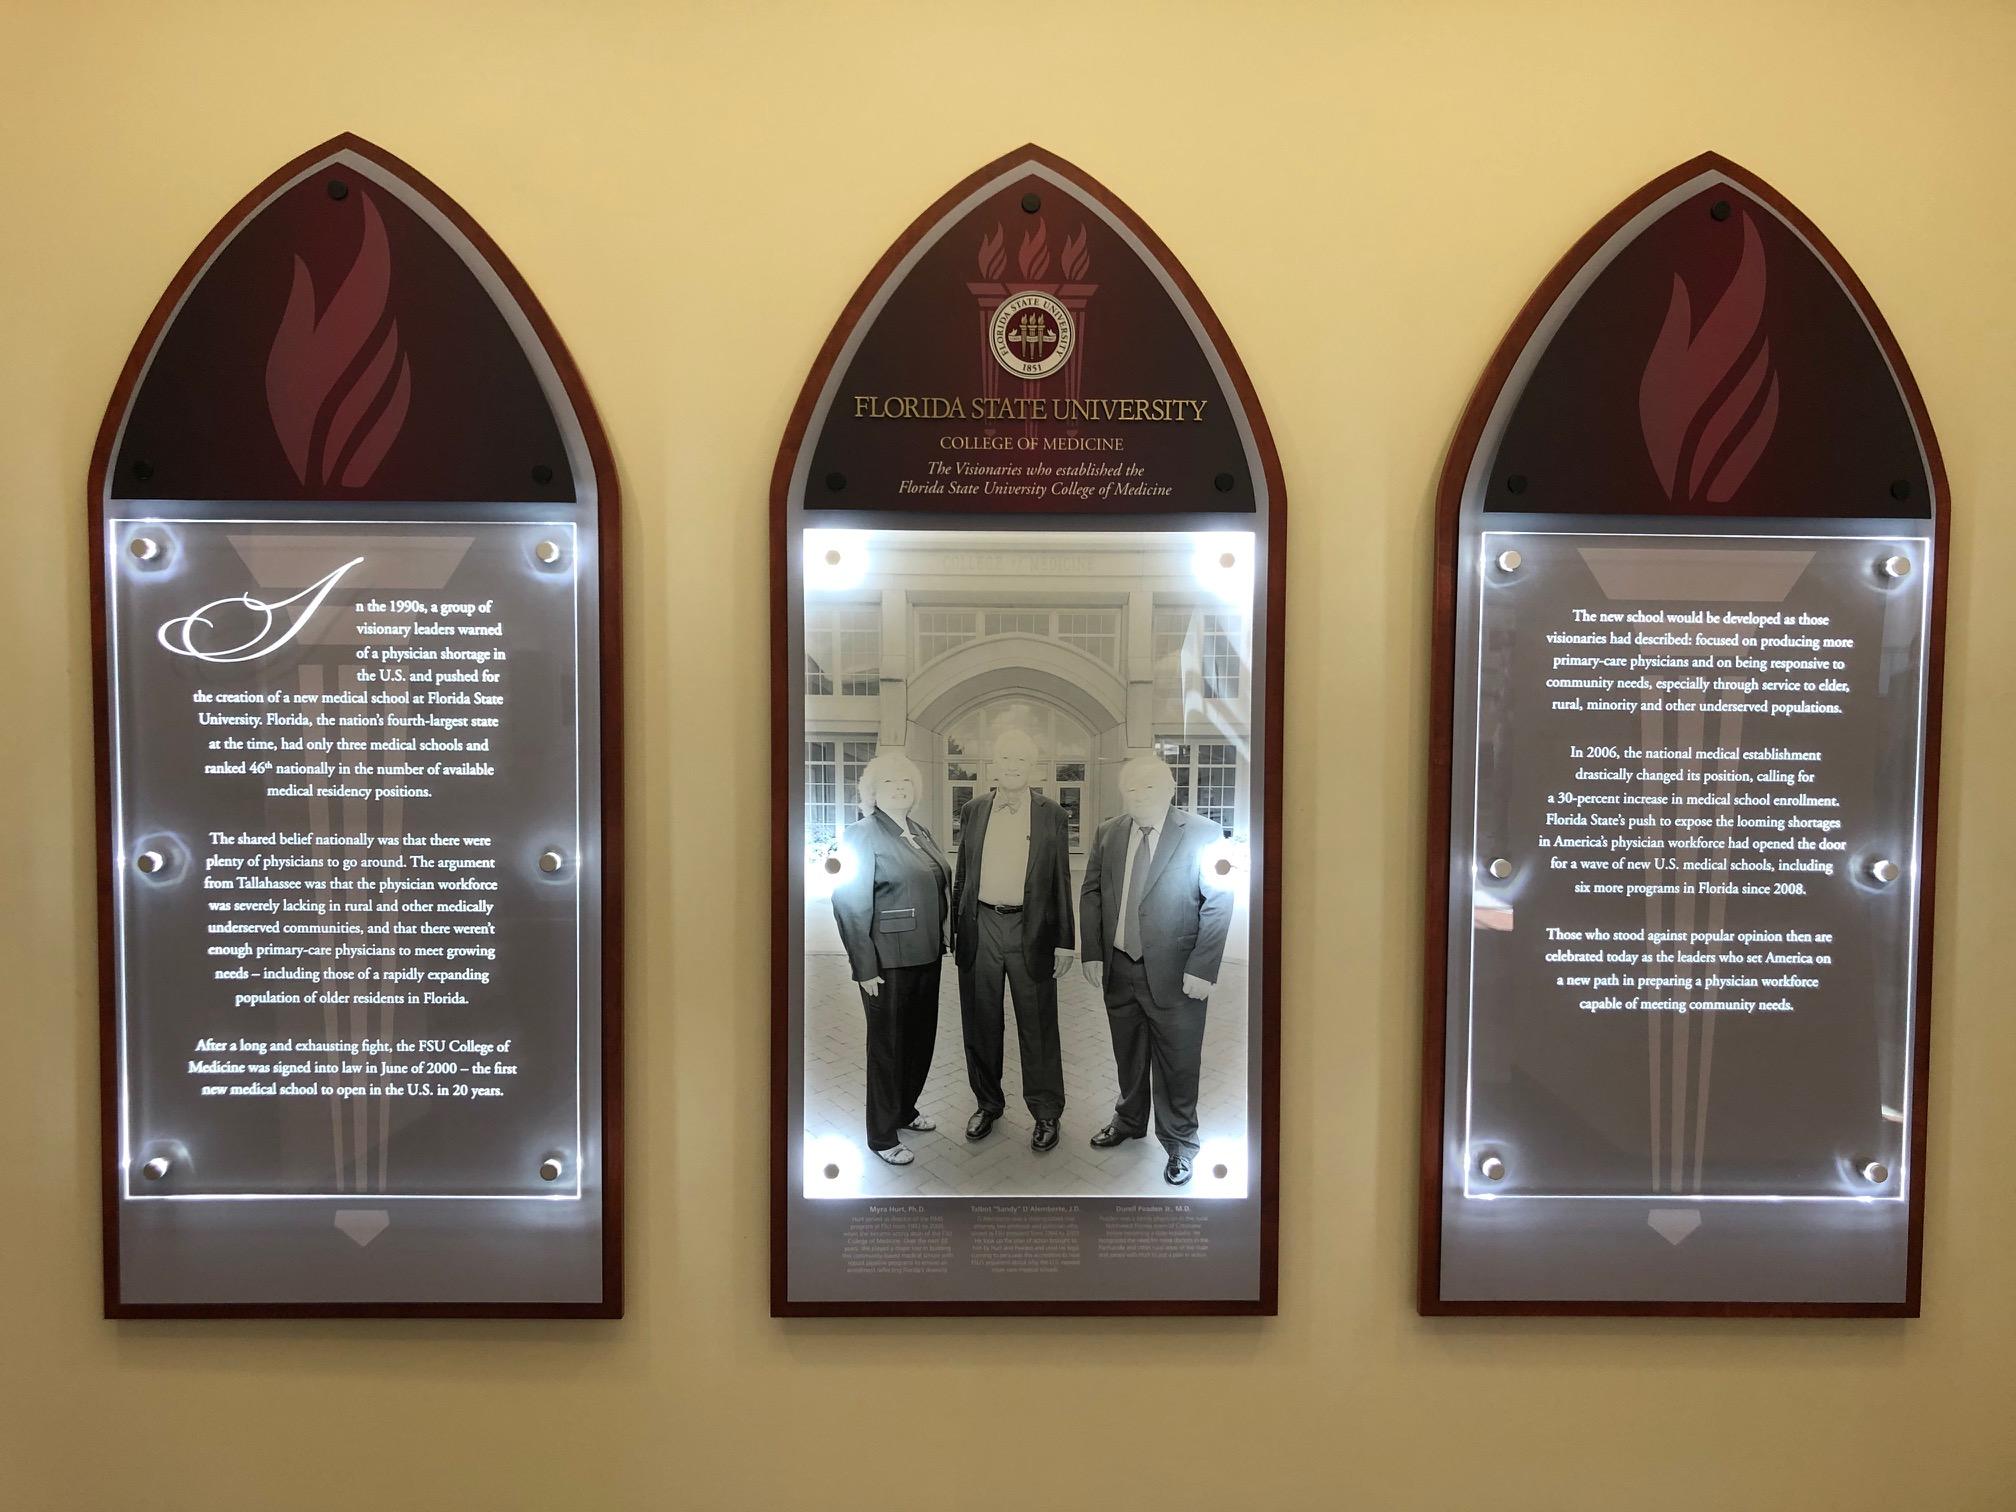 The new Founders Wall at the College of Medicine